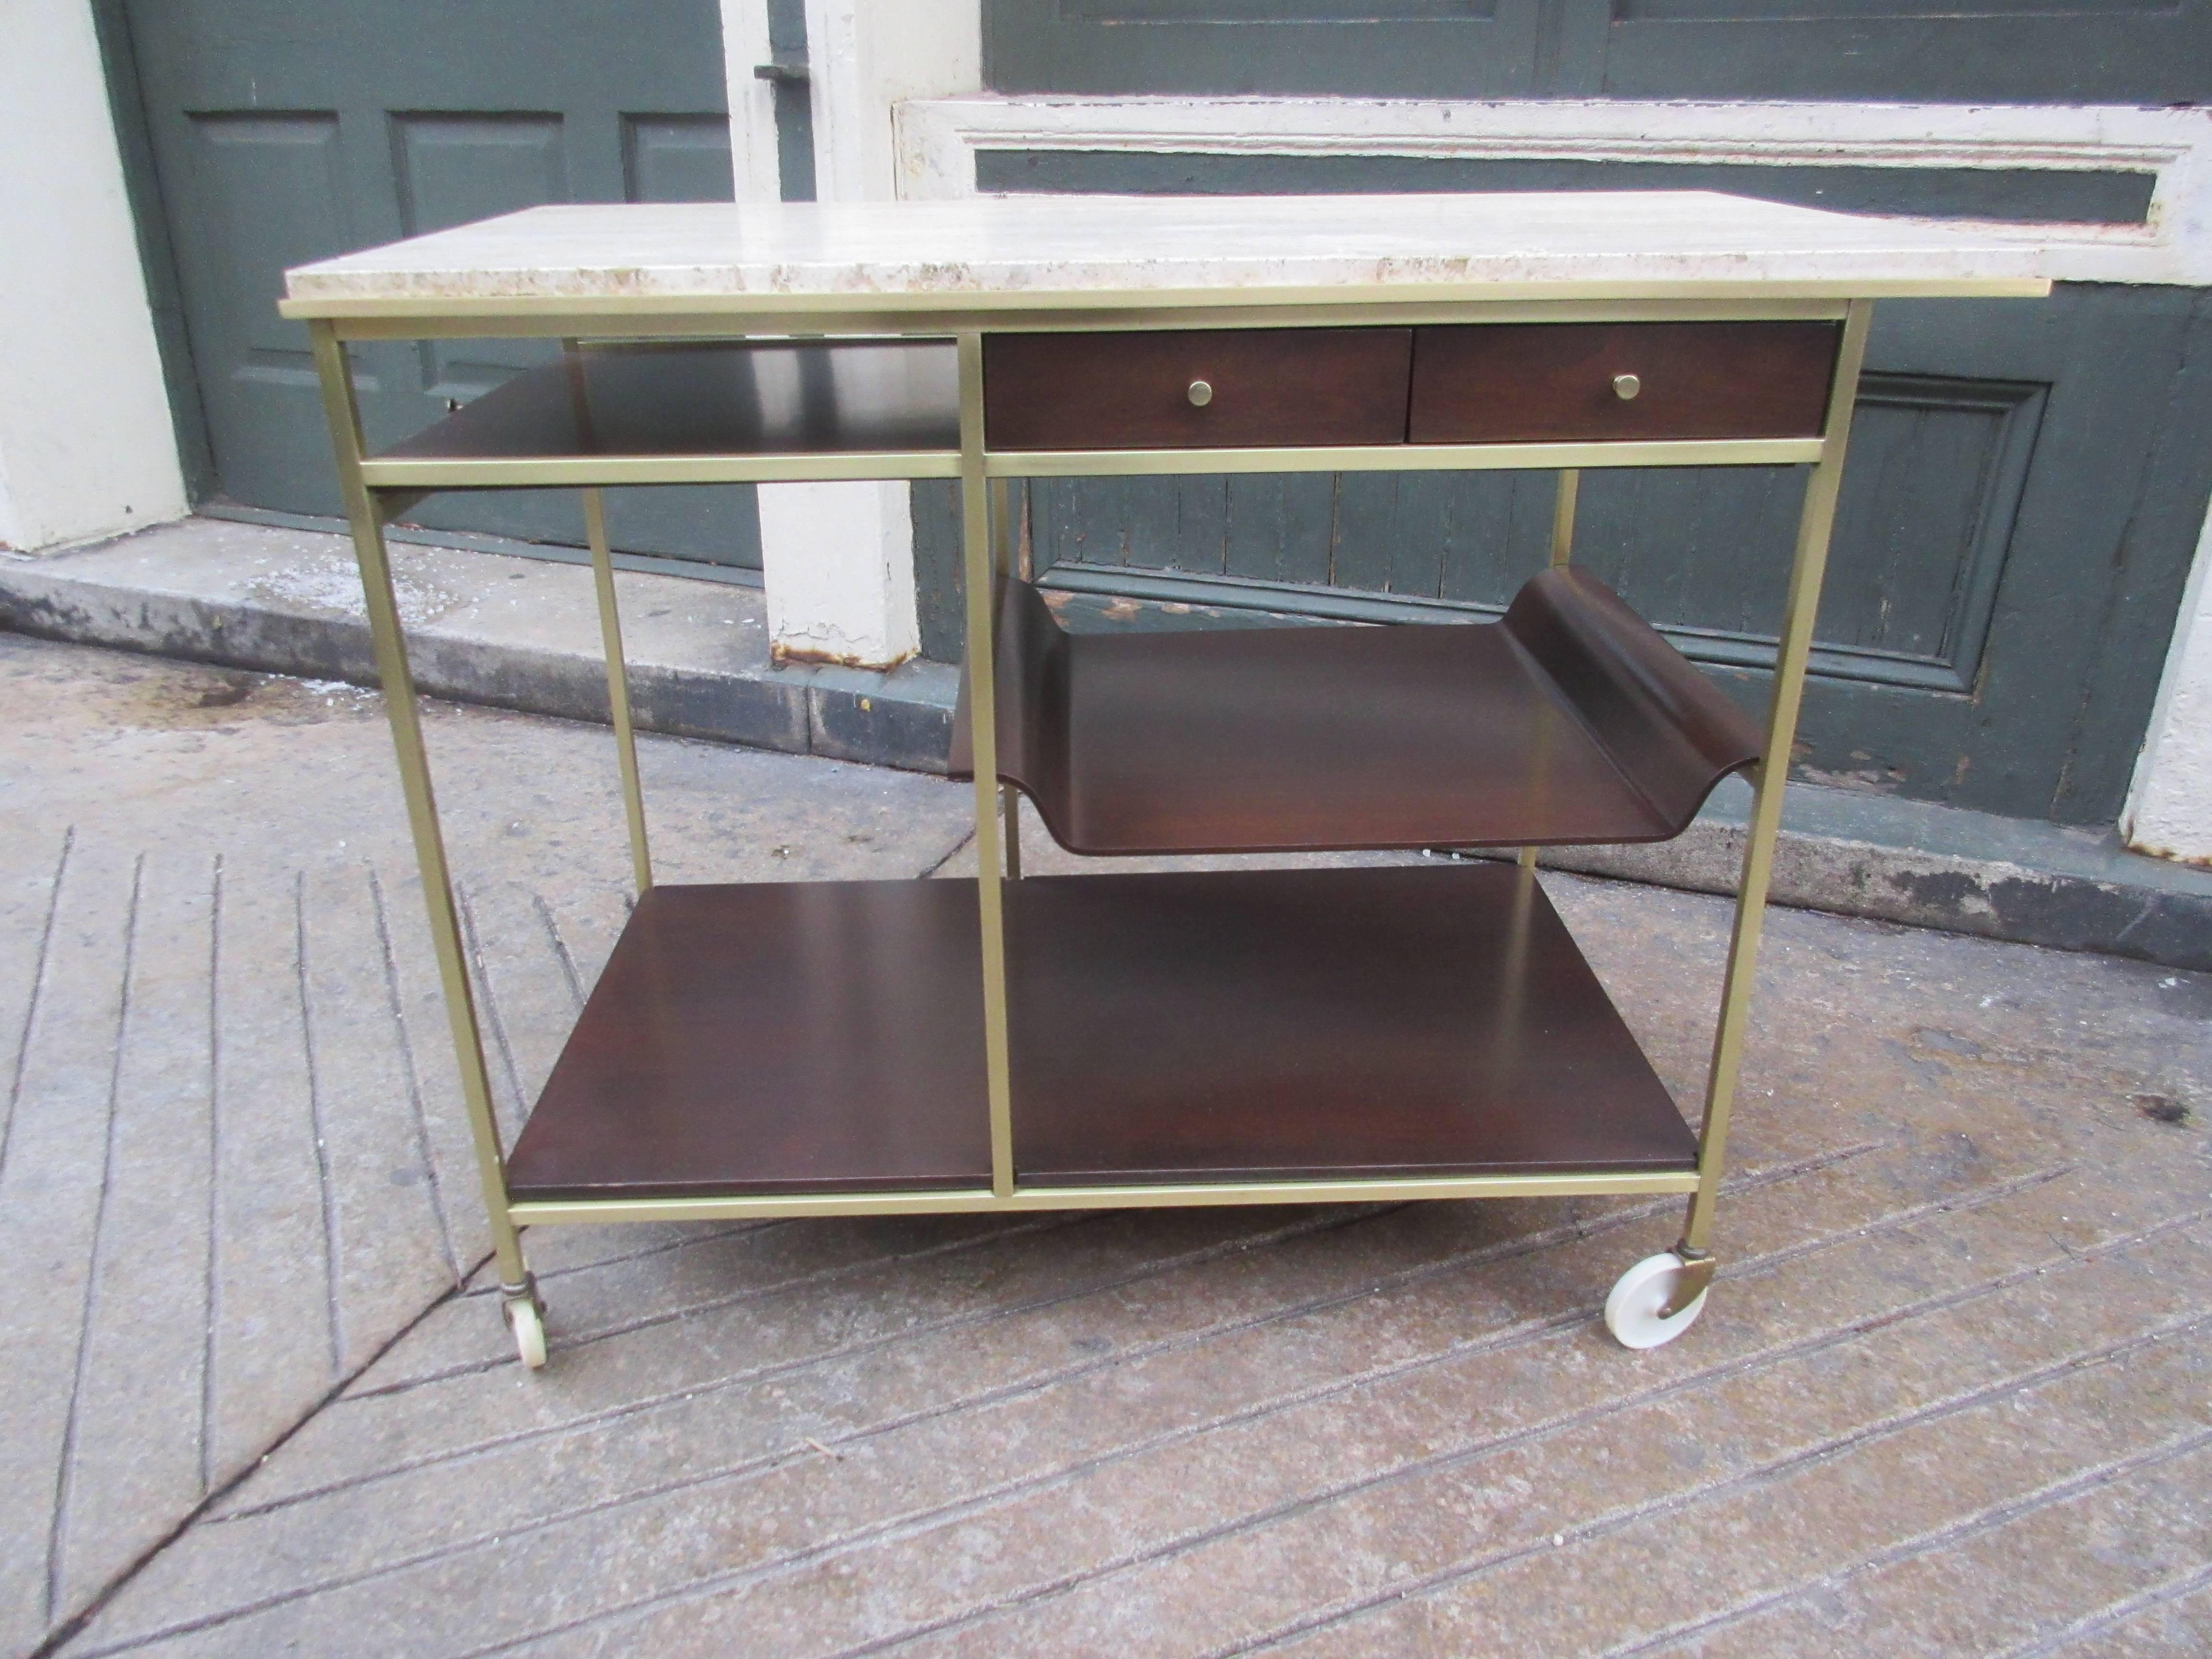 Elegant walnut and brass bar cart with original travertine top. Removable molded plywood shelf doubles as a serving tray. Walnut just refinished and brass polished. Pull-out shelve provides additional work space. Bought from original owner.